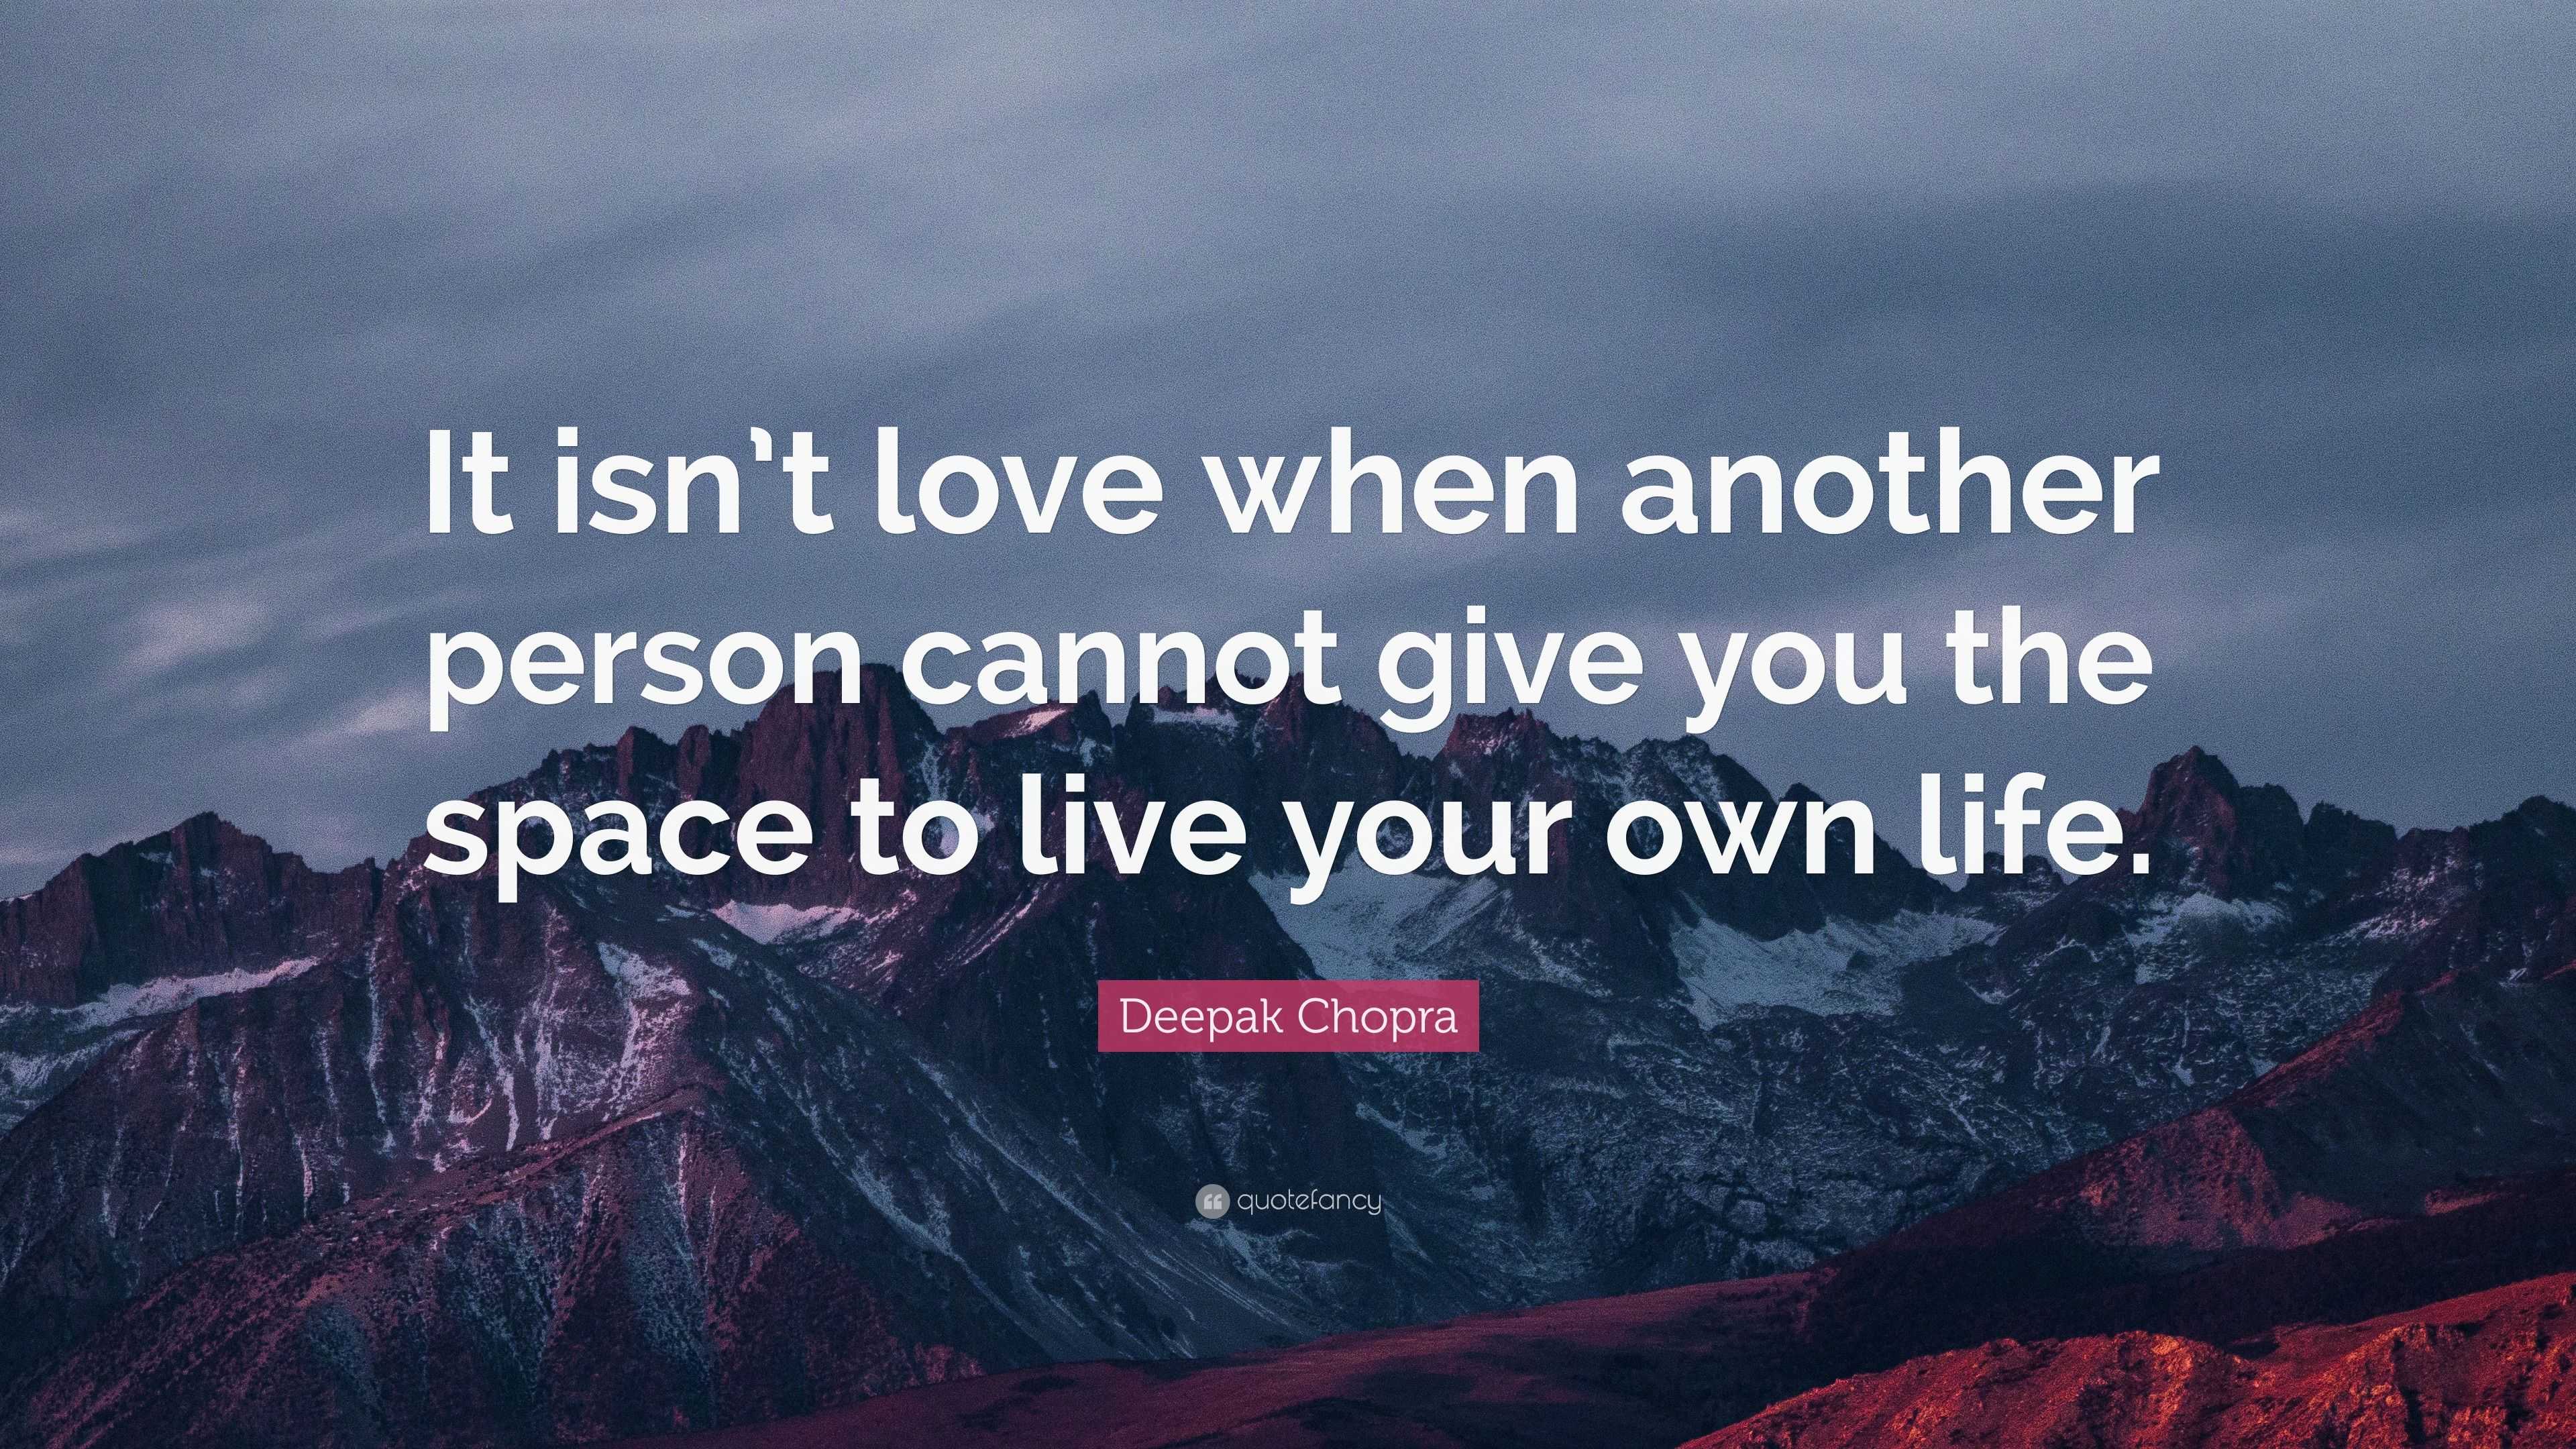 Deepak Chopra Quote “It isn t love when another person cannot give you